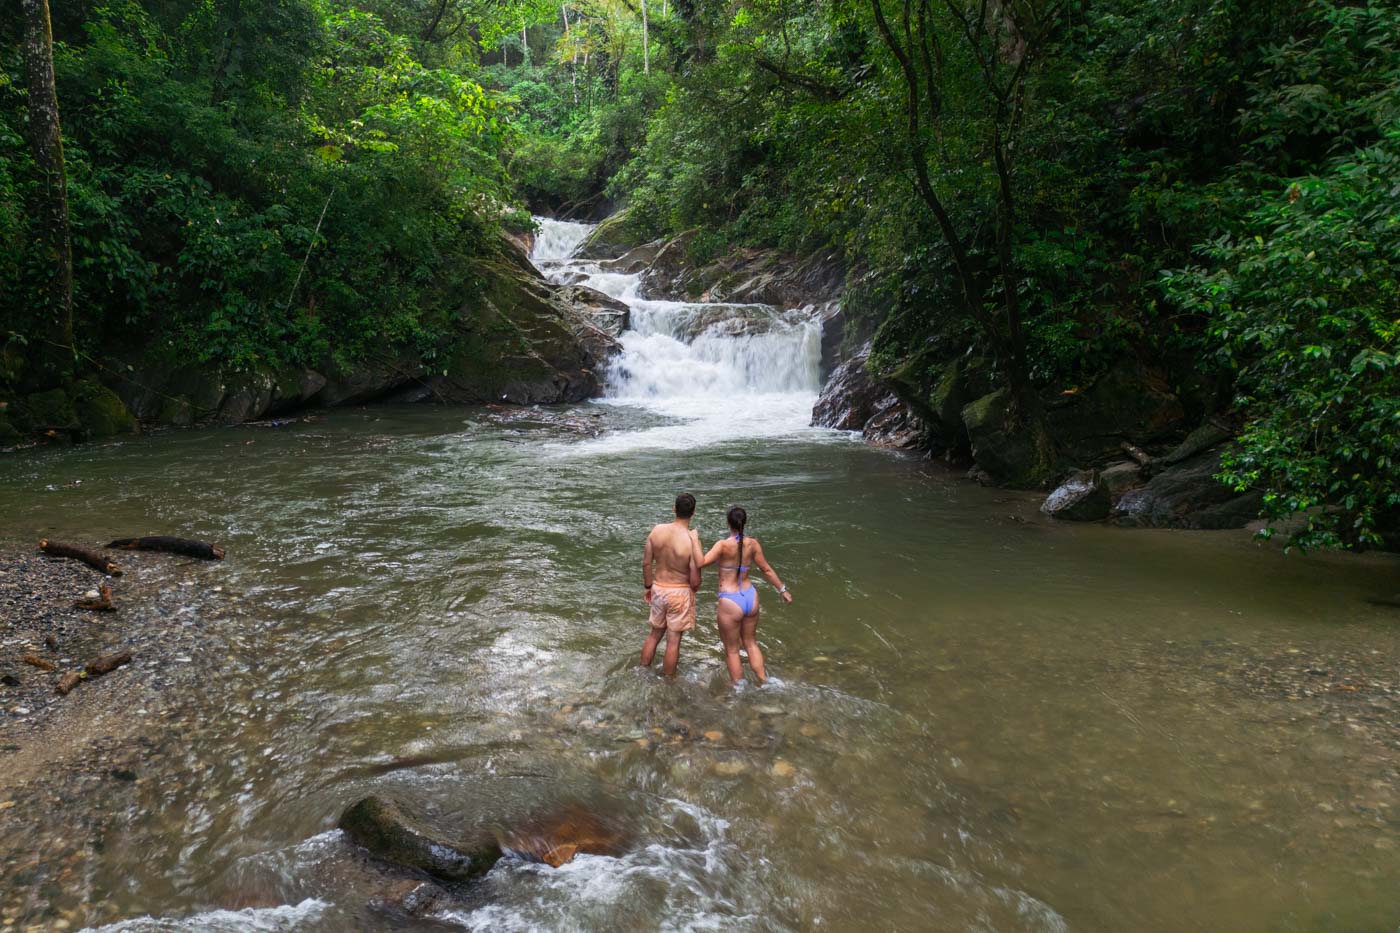 Ryan and Sara in bathing suits paddling in the river at Pozo Azul waterfall in the forest..